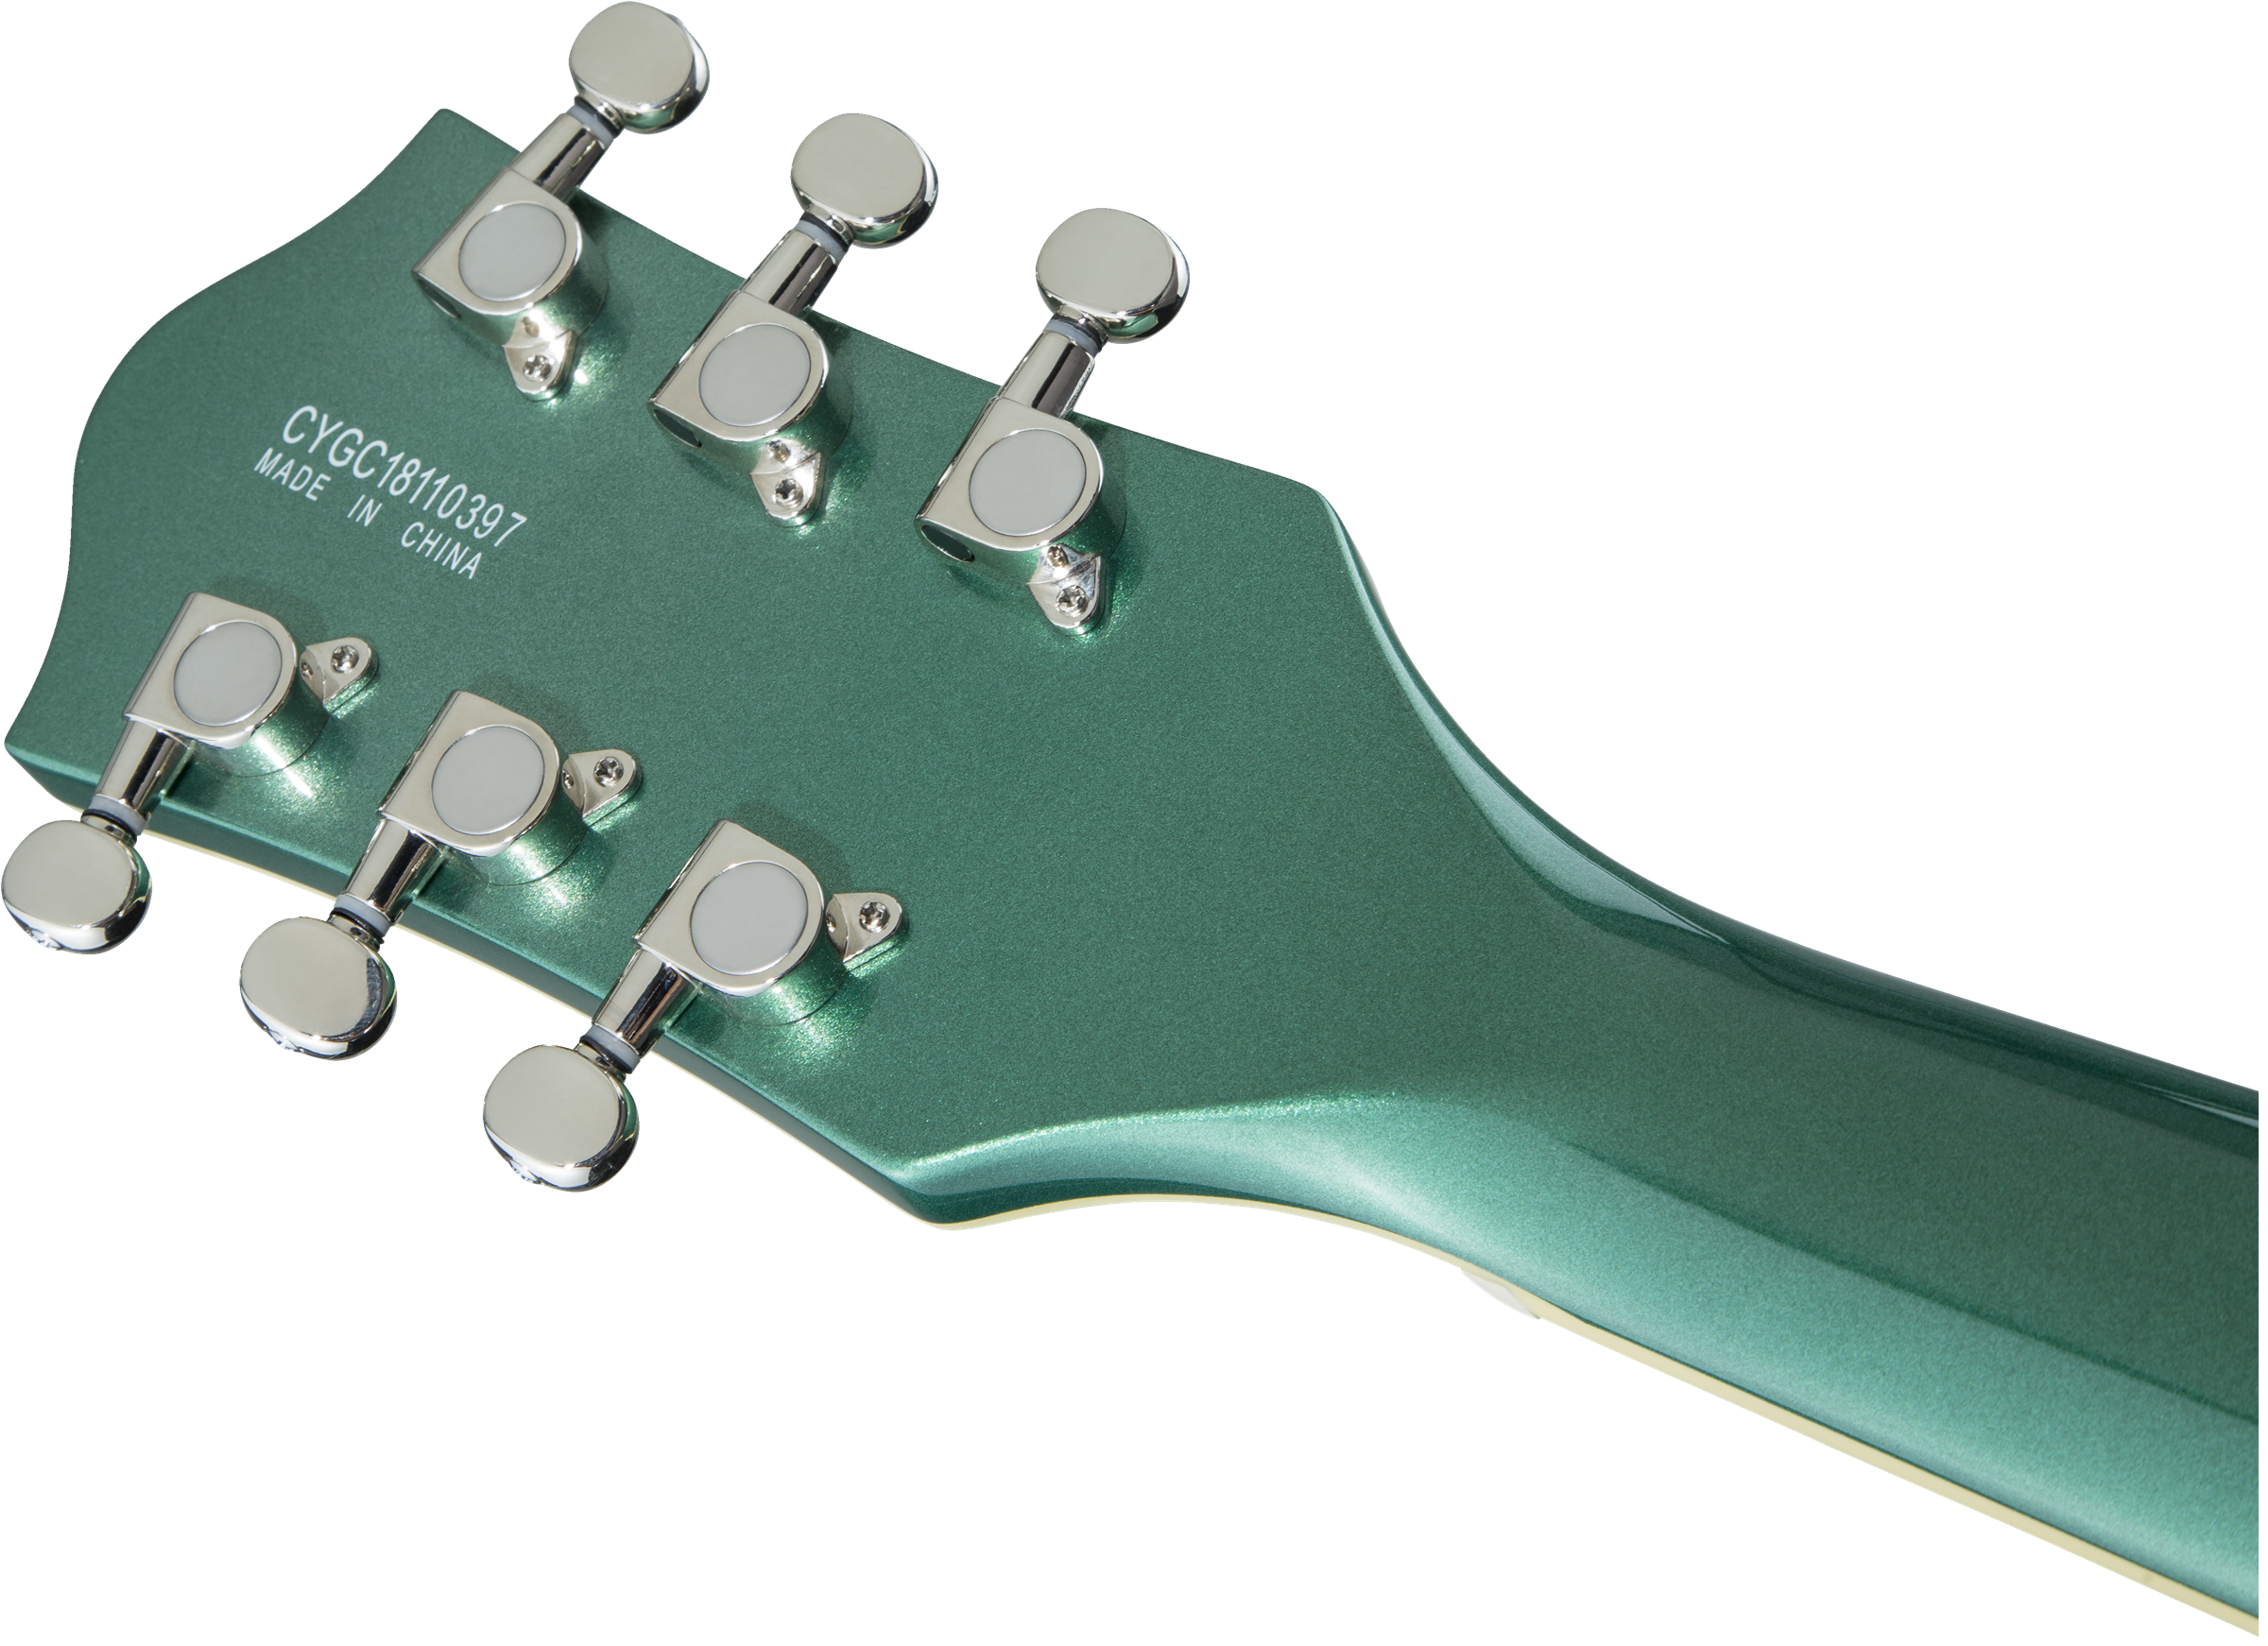 Gretsch G5622T Electromatic Center Block Double-Cut with Bigsby Laurel Fingerboard Georgia Green